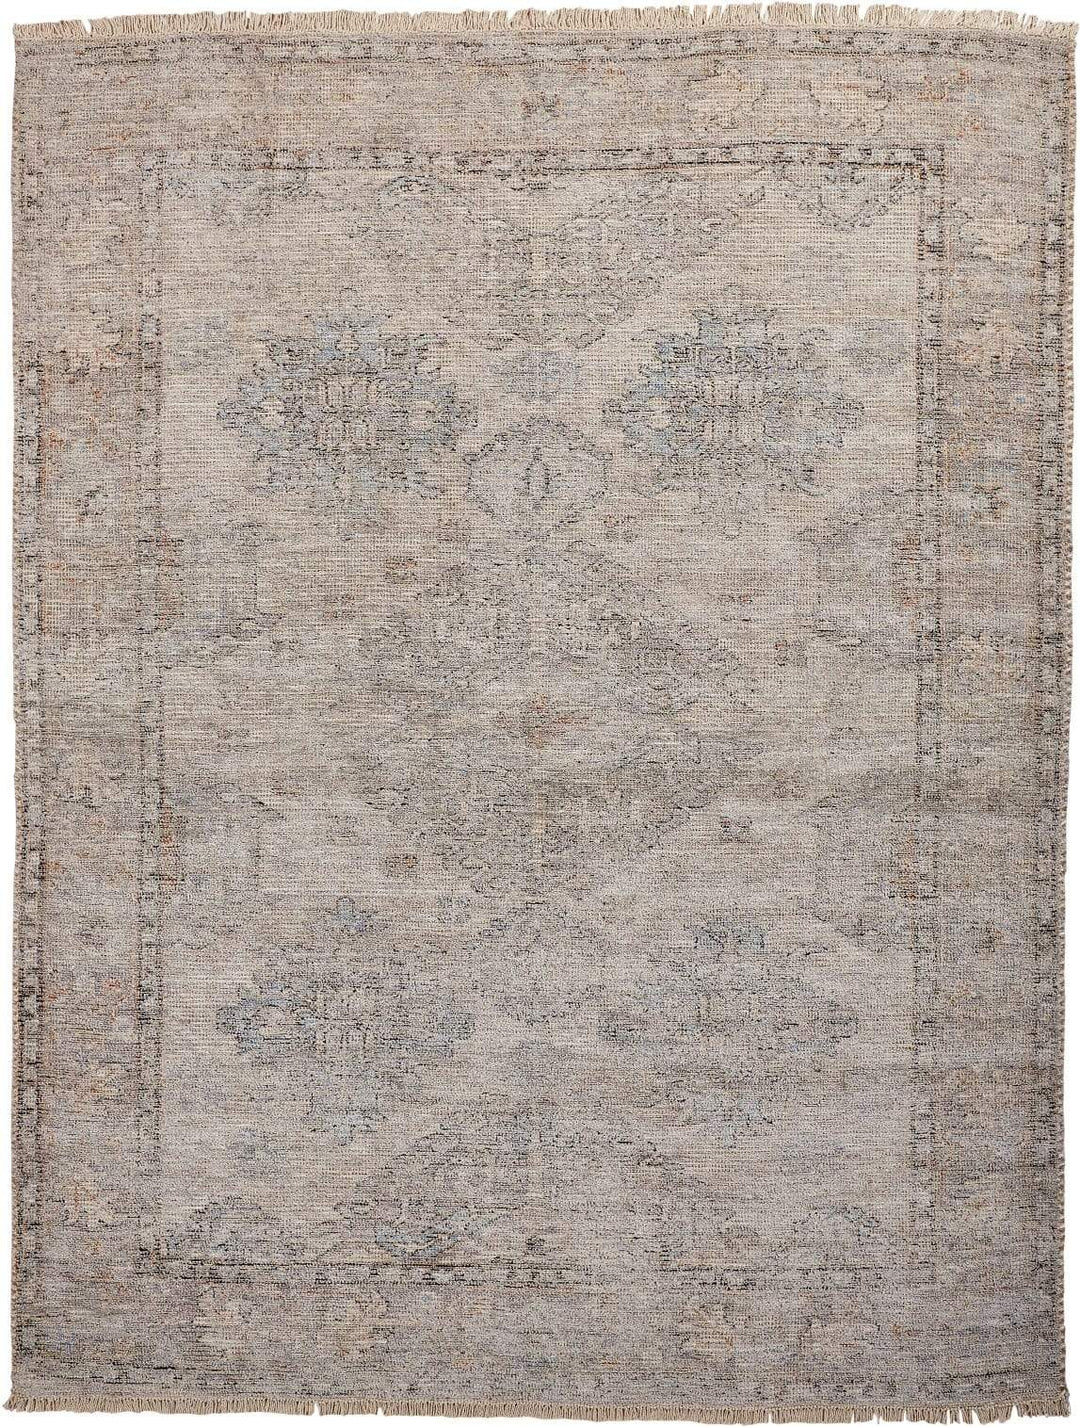 Feizy Feizy Caldwell Vintage Space Dyed Wool Rug - Latte Tan & Gray - Available in 6 Sizes 3'-6" x 5'-6" 8798801FSTN000C50